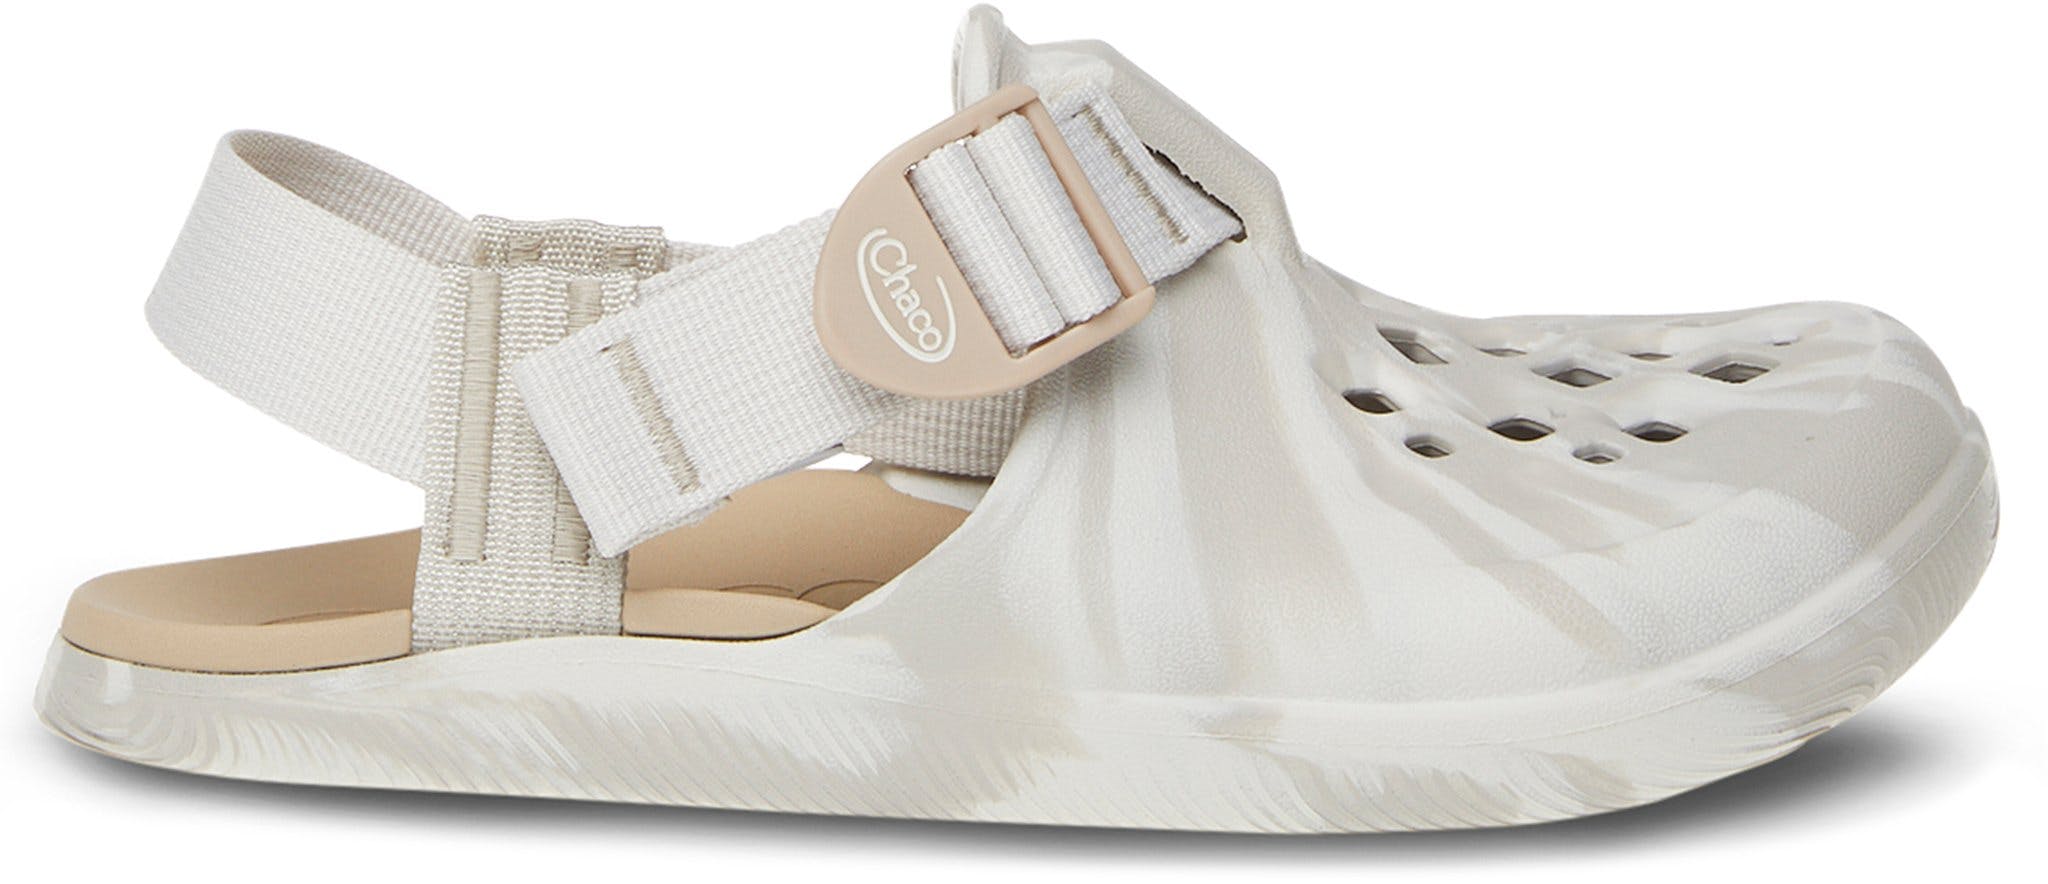 Product image for Chillos Clog - Women's